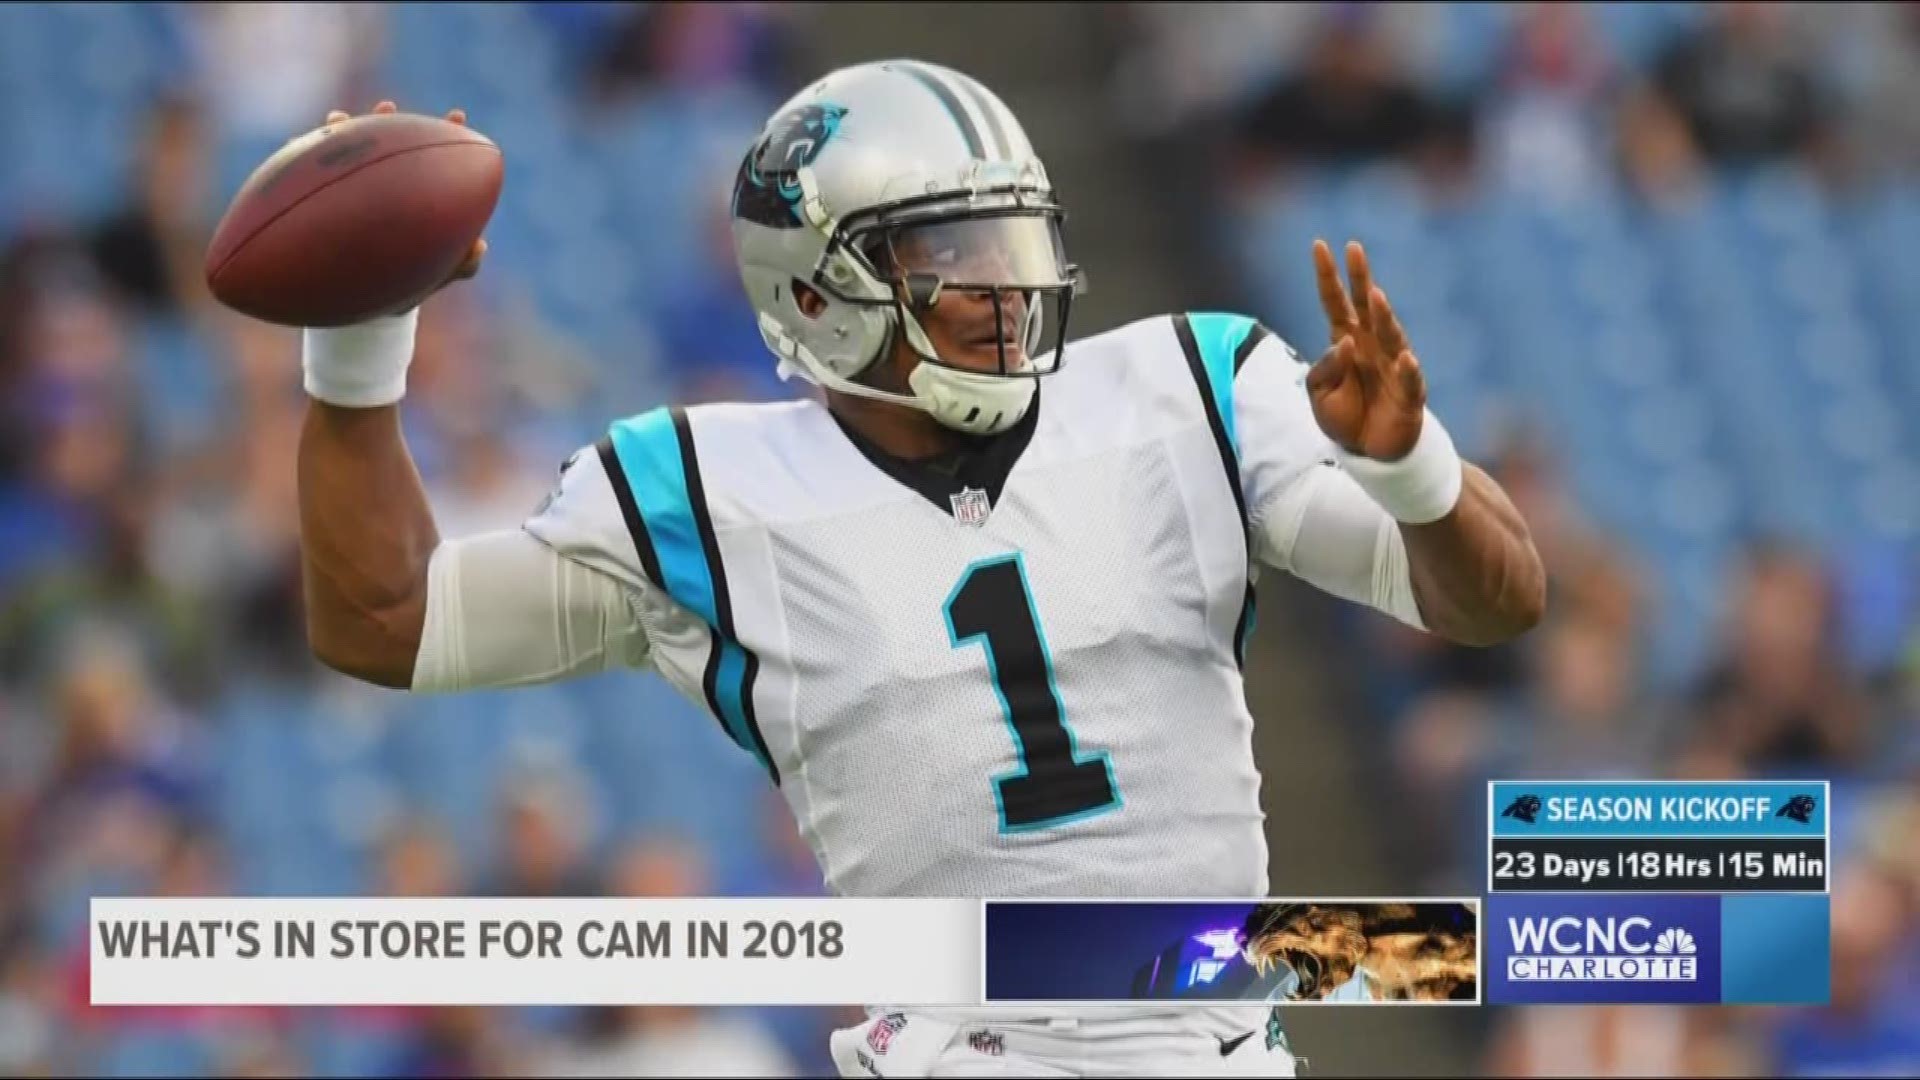 Panthers will only go as far as Cam will take them